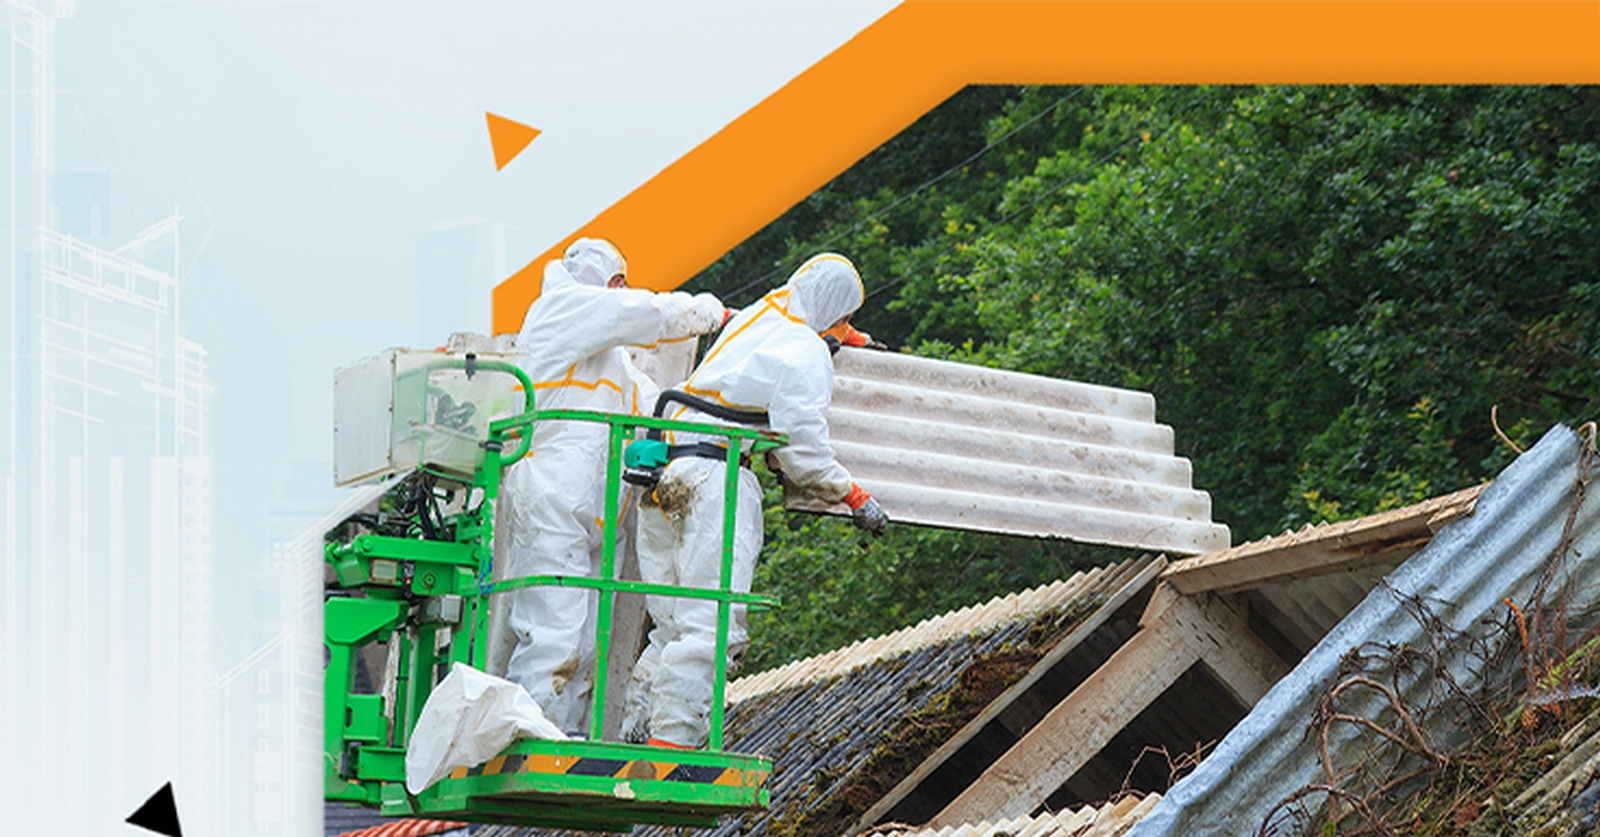 Reliable Asbestos Removal/ Abatement Services in Ottawa, ON